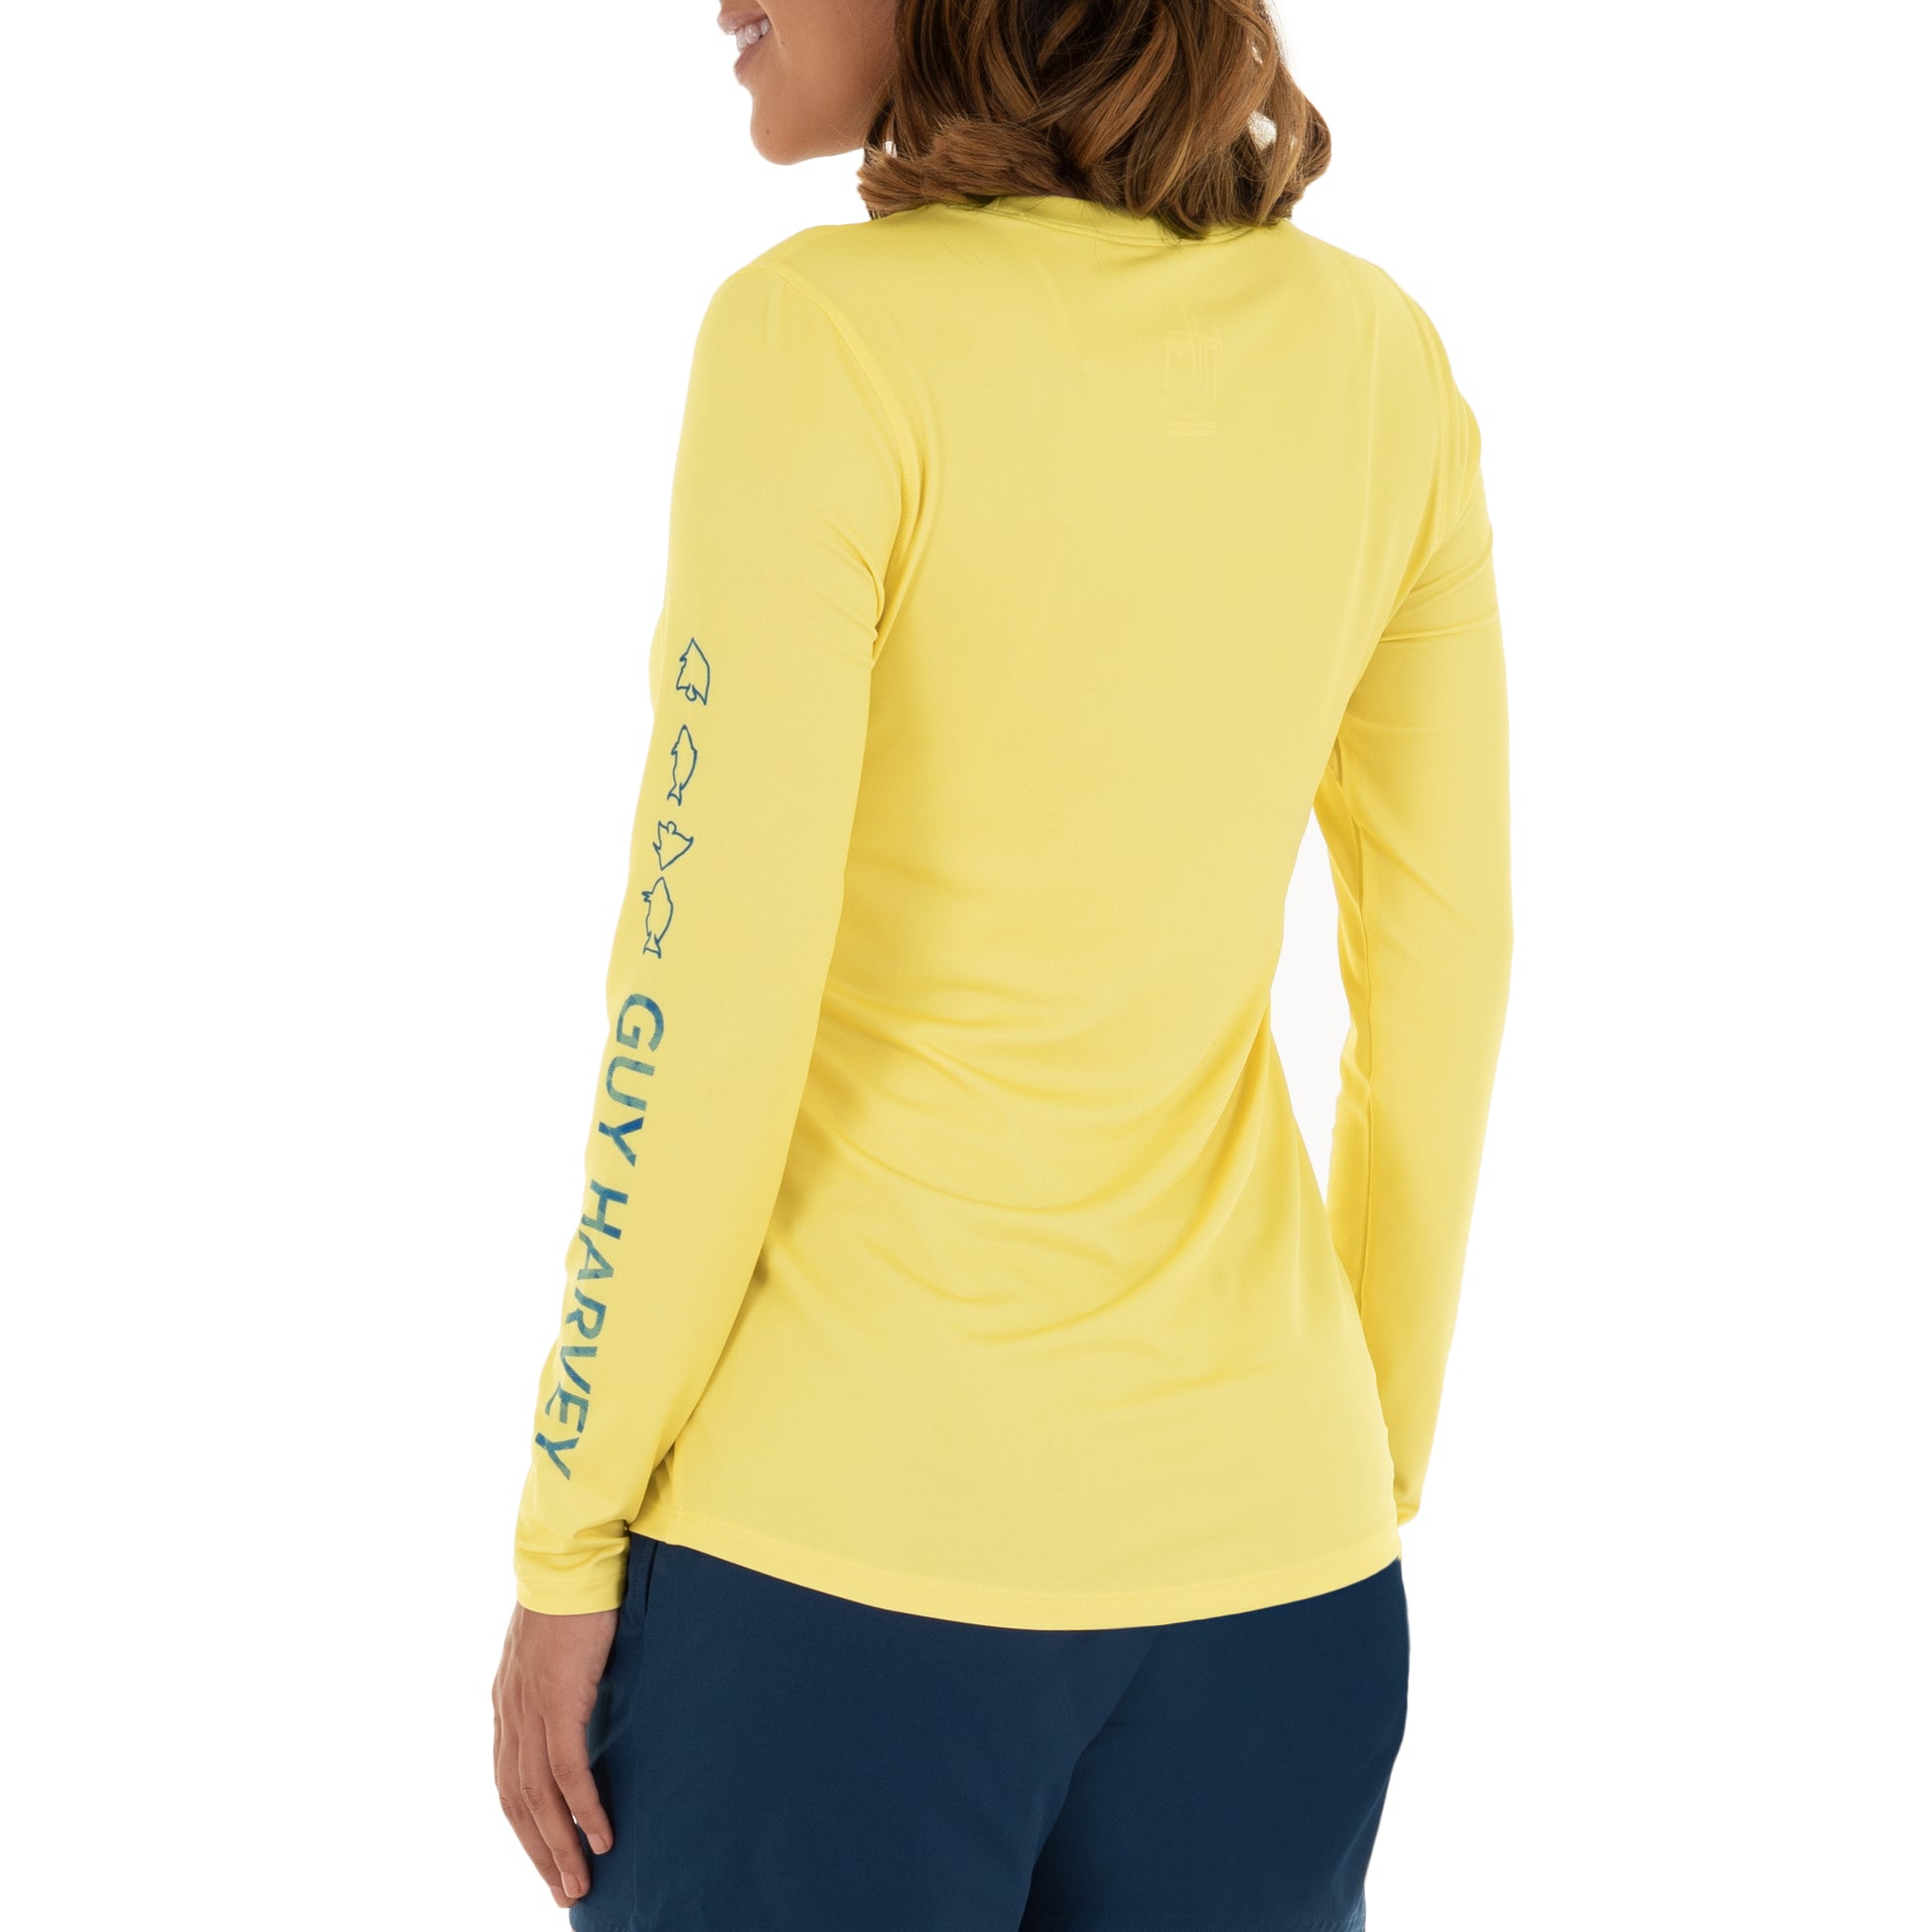 Ladies Core Solid Yellow Sun Protection Top View 2